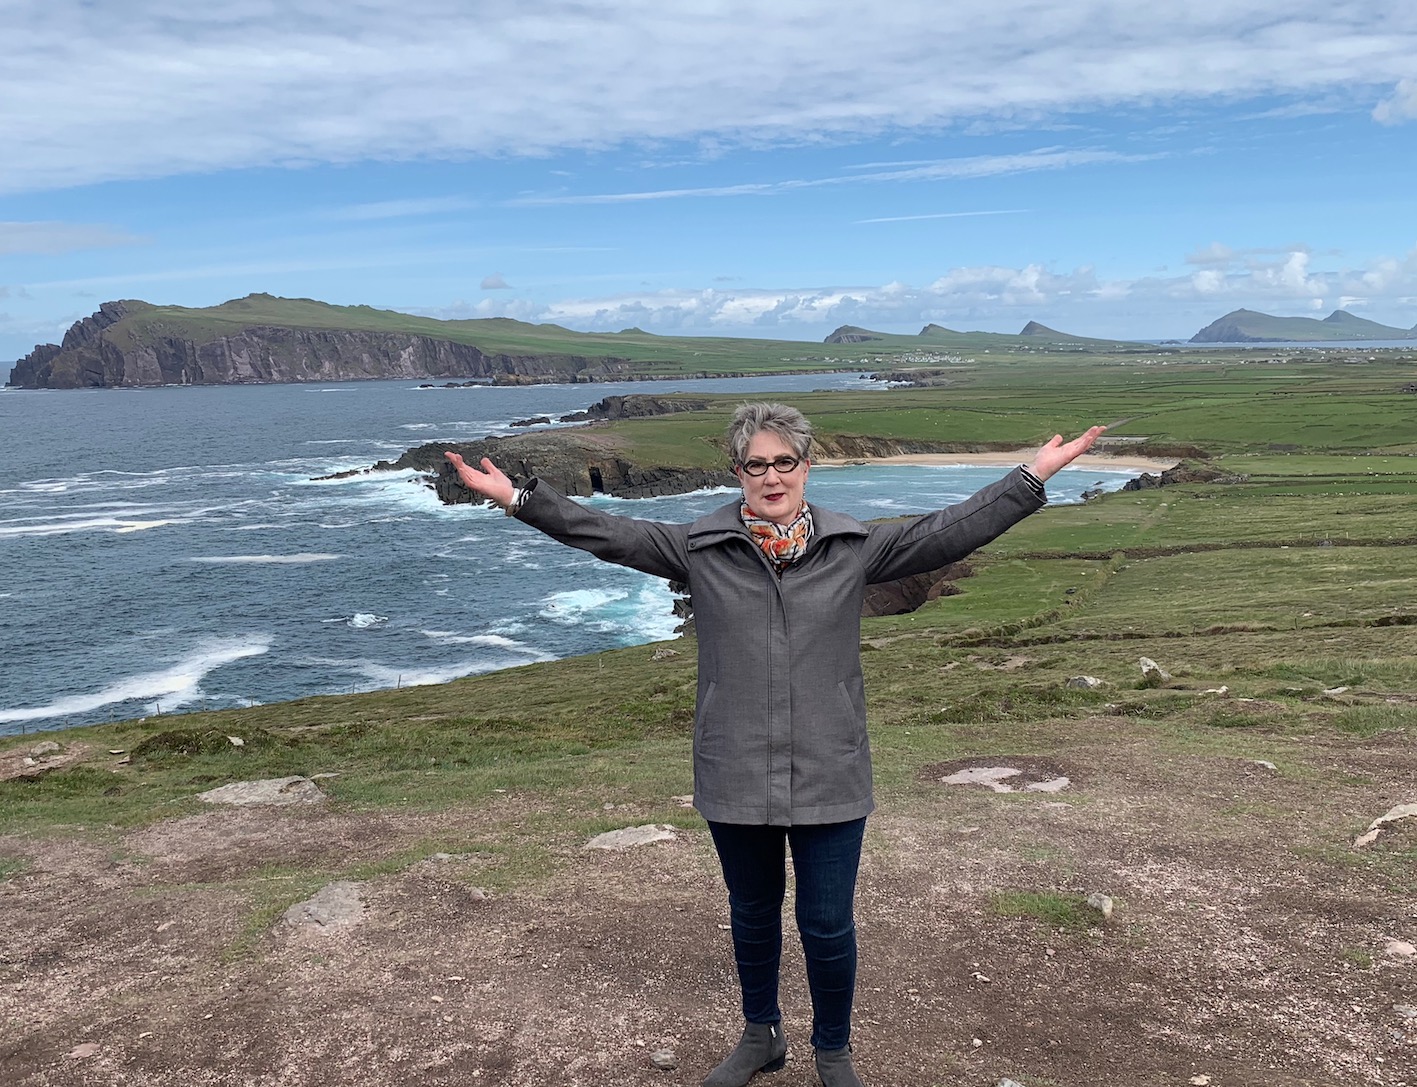 Marylou Colver celebrating her birthday on the Slea Head Drive in Dingle